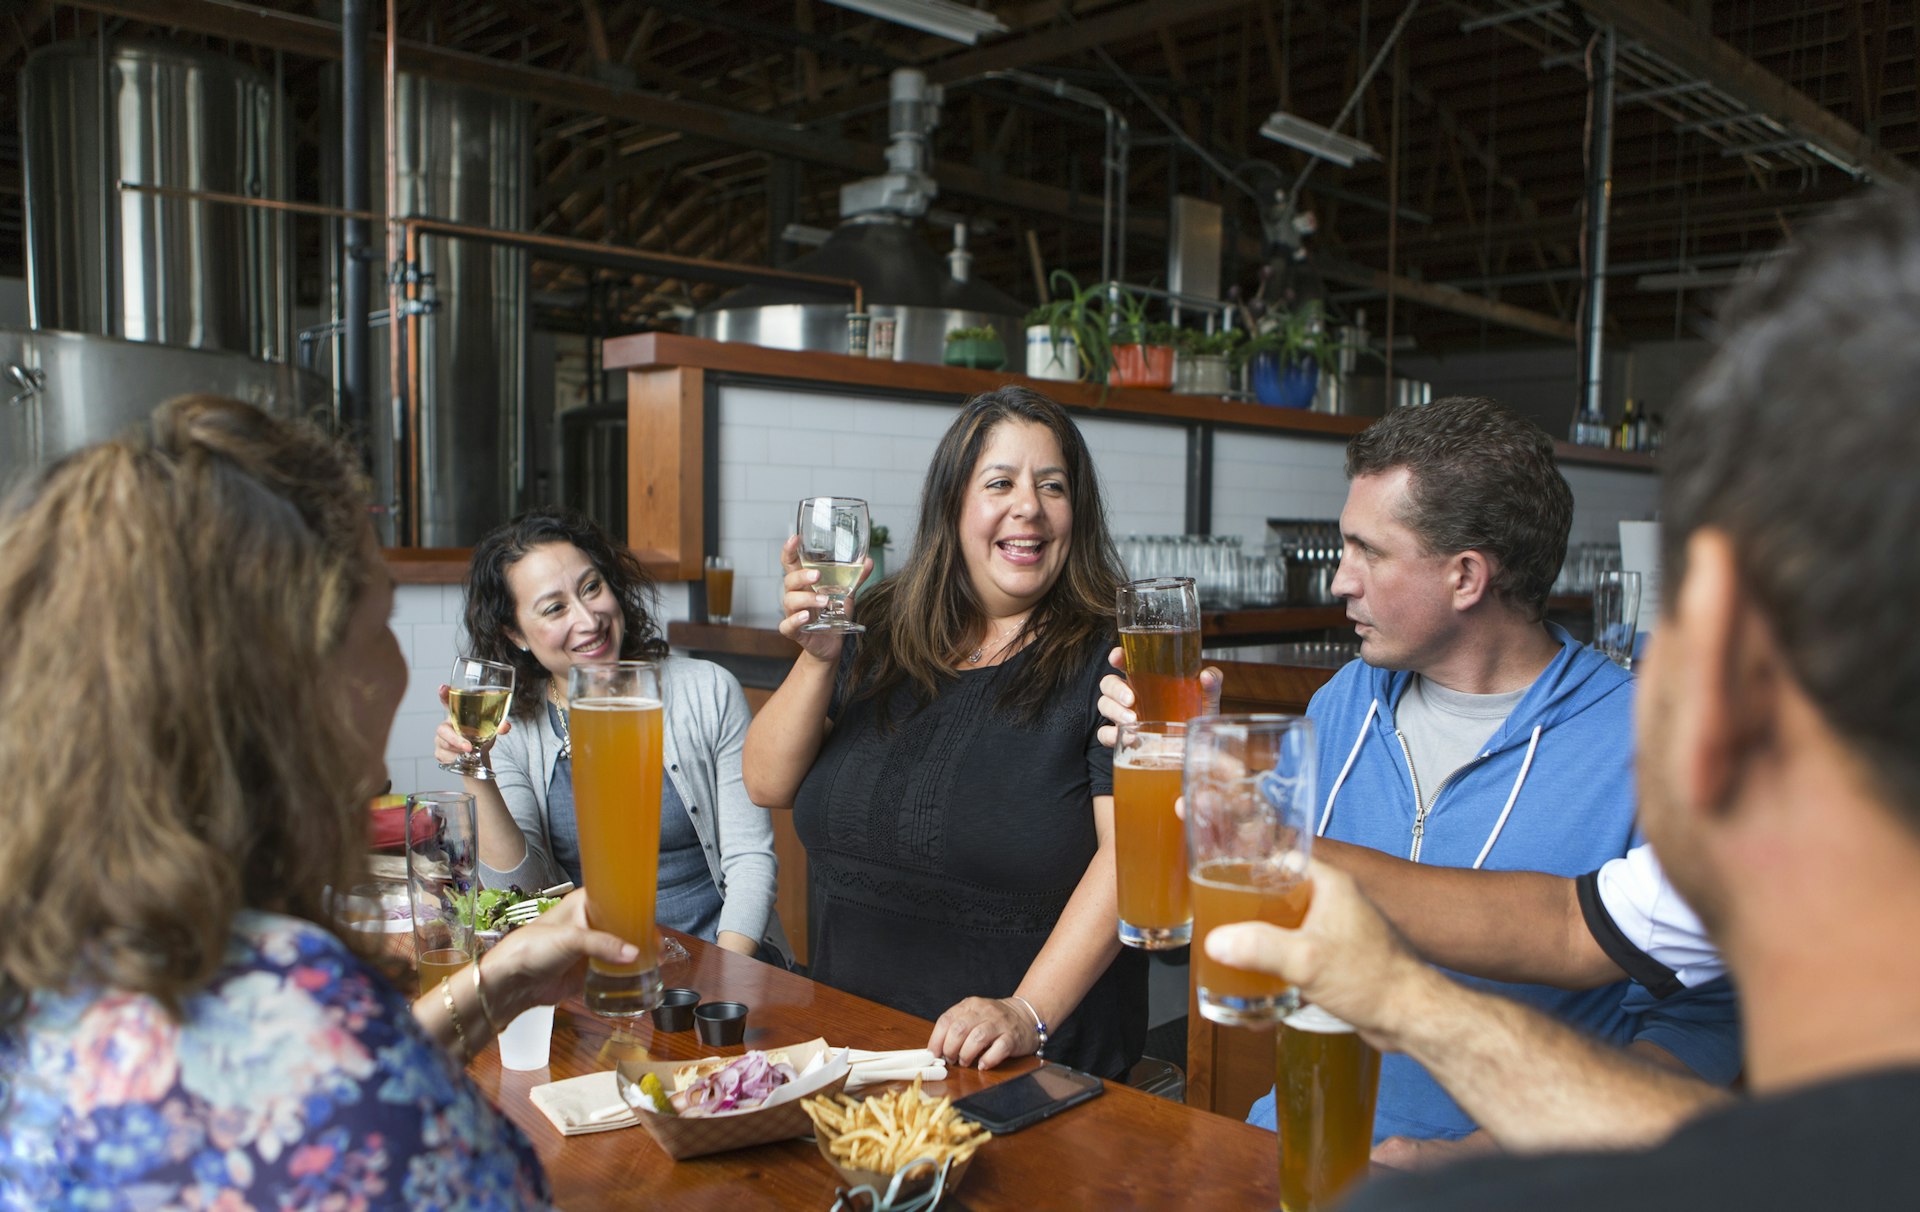 People drink beer and wine in a brewery, with an out-of-focus bar and stainless steel beer manufacturing equipment in the background. 